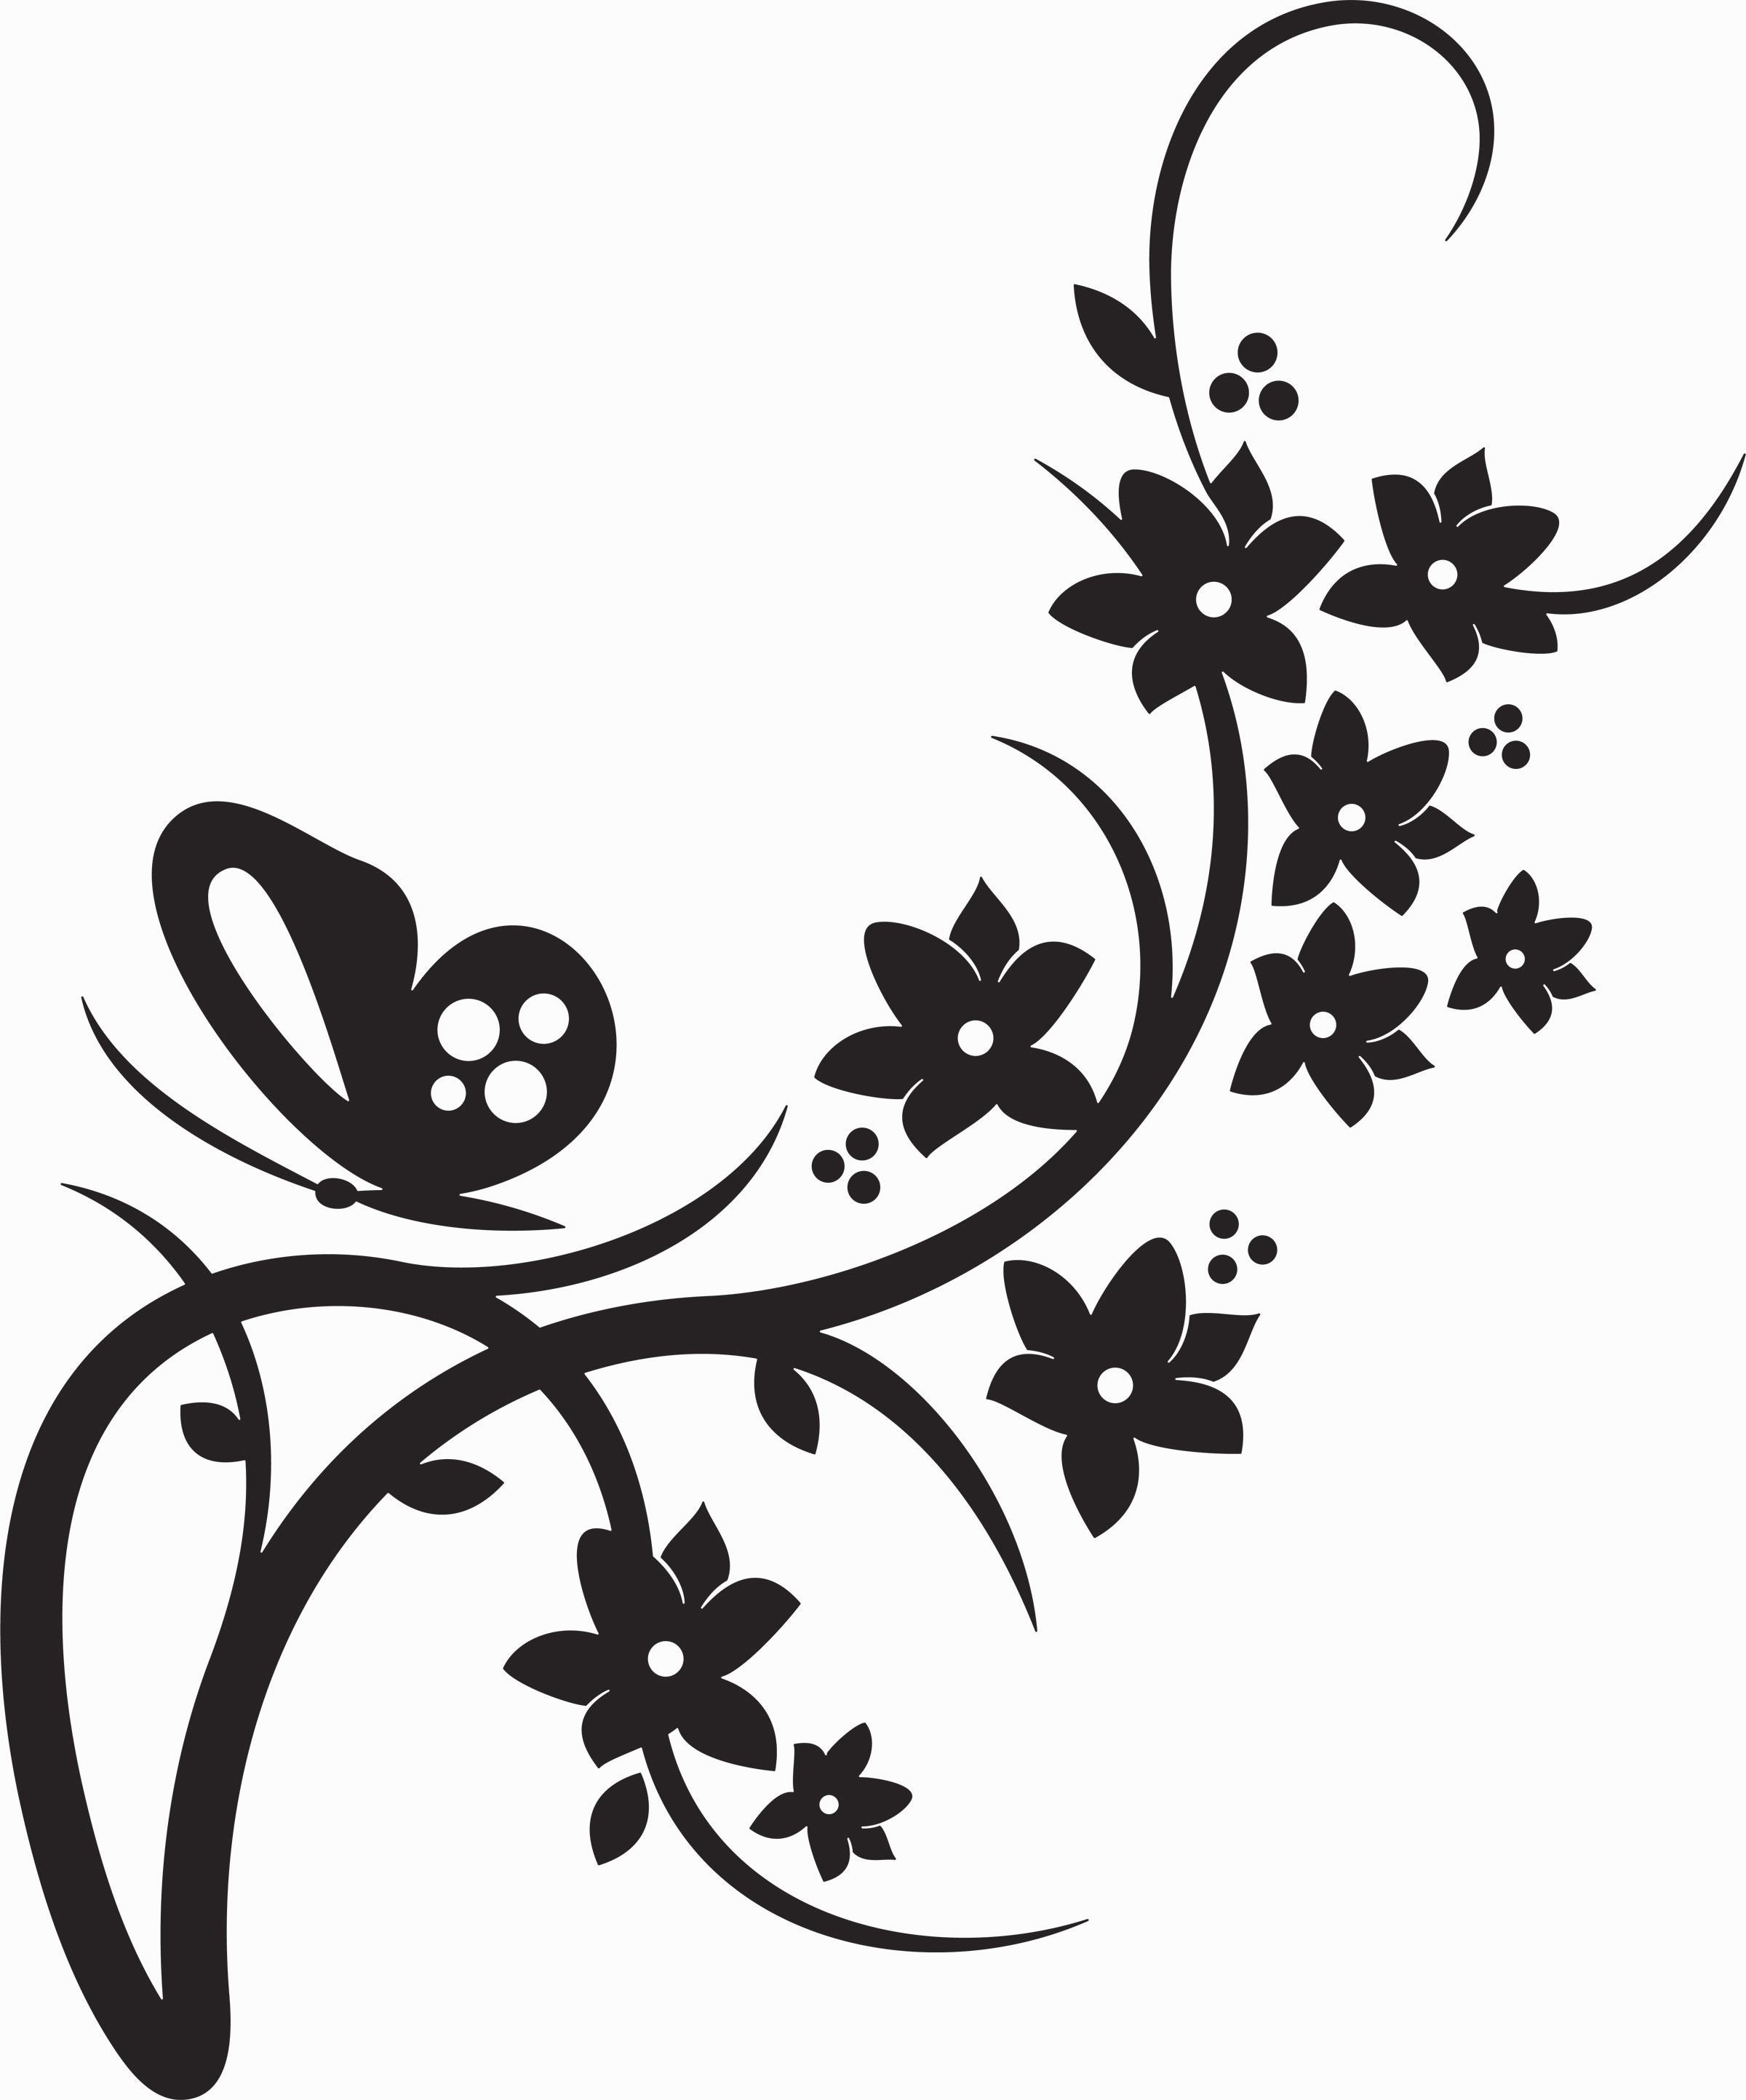 21 Stylish Flower Vase Stencil 2024 free download flower vase stencil of 5 elegant flower border clipart graphics best roses flower in flower black and white clipart cilpart